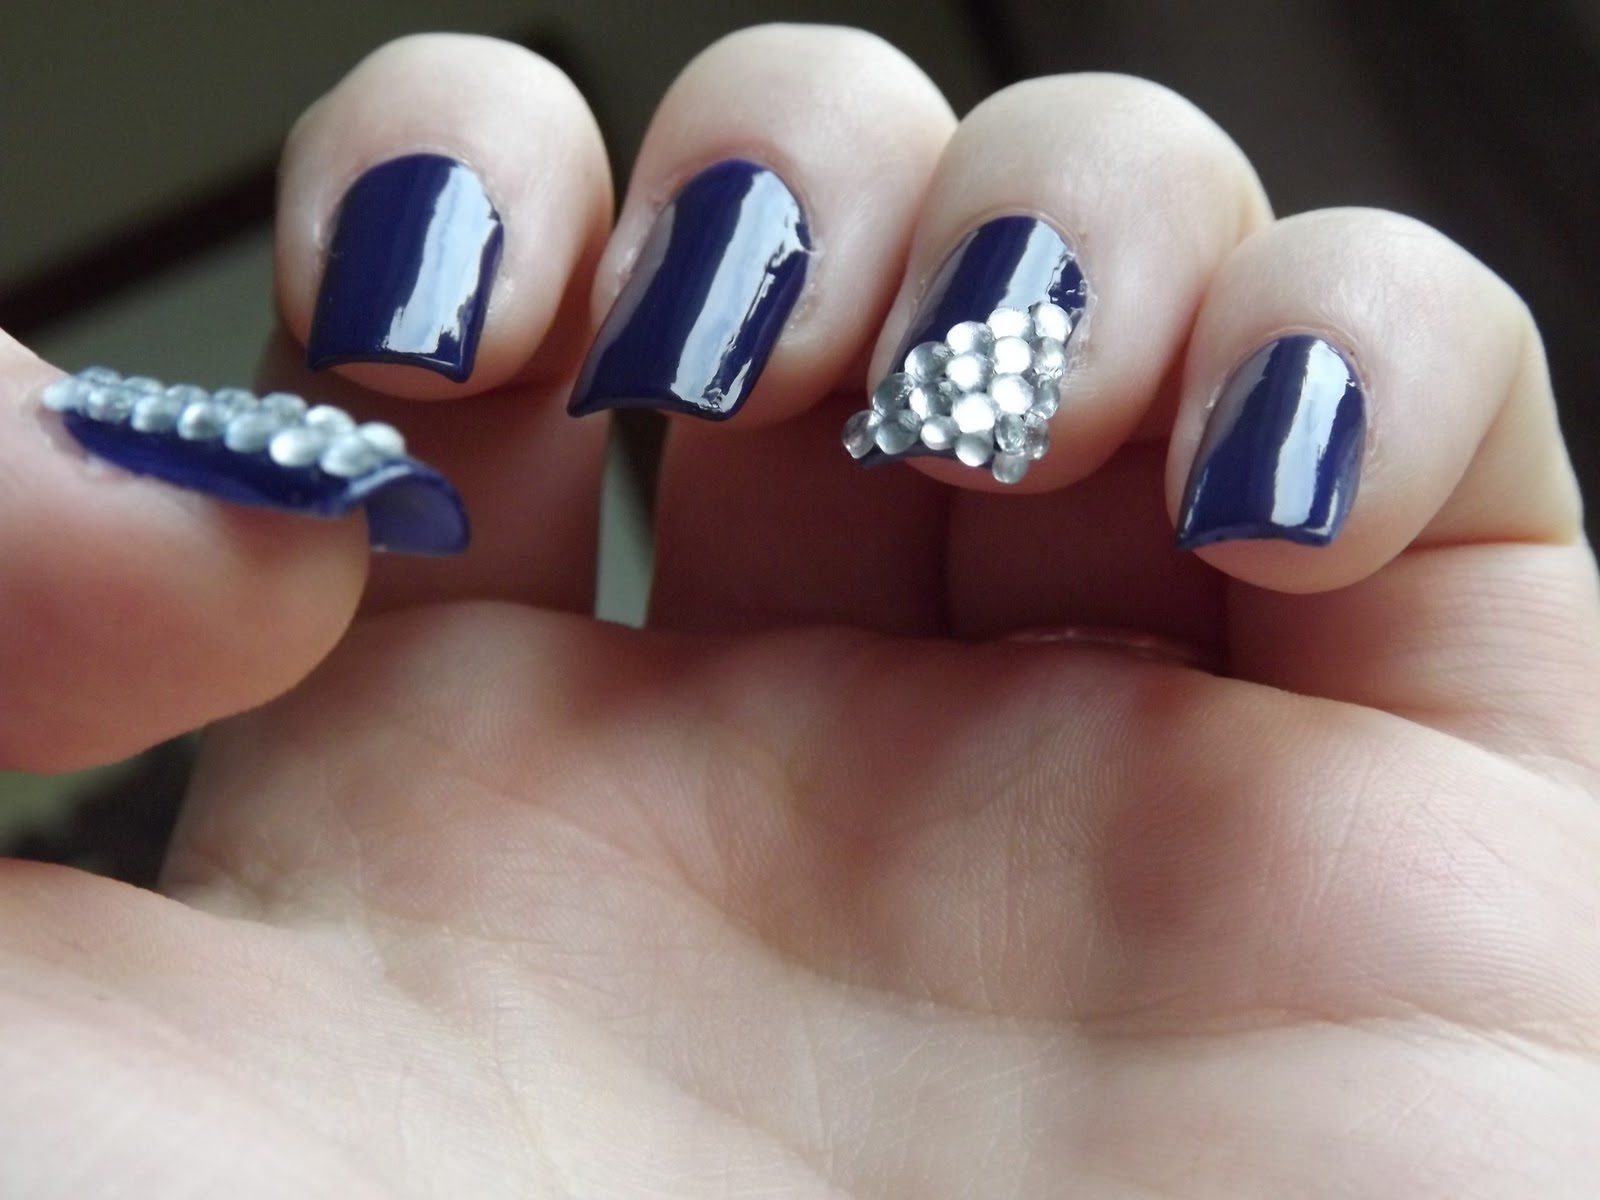 2. Sparkling Bling Nail Art - wide 4